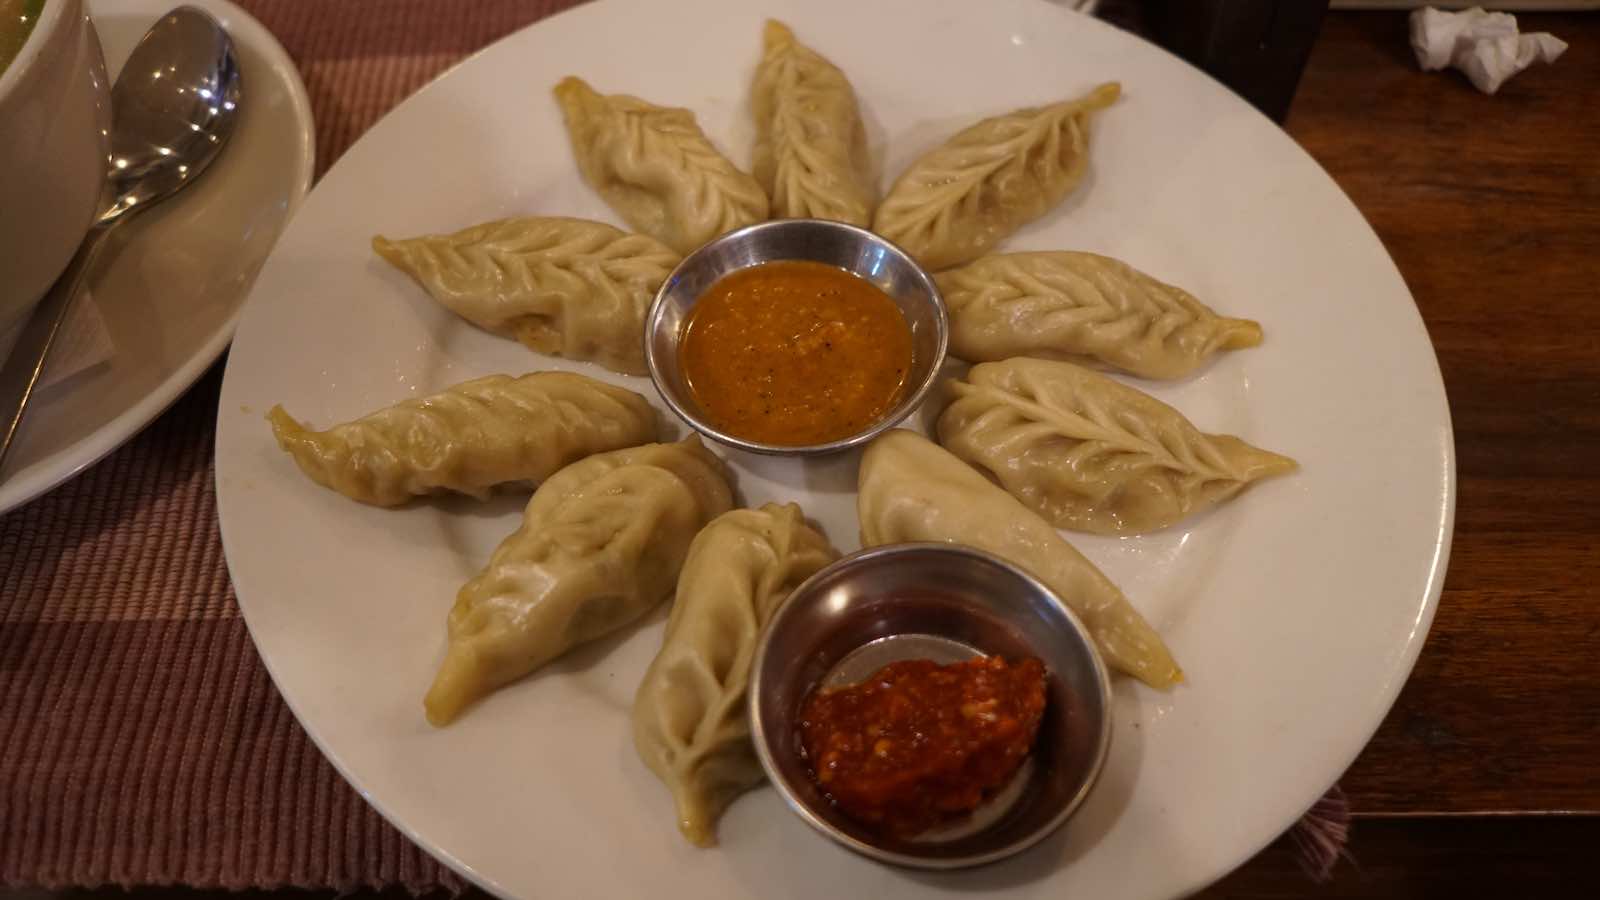 Ate a lot of vegetable momos during my time here, I decided to avoid meat and stick to local foods to lower my chances of food poisoning. These were good and were very similar to the chinese dumplings I am familiar with.